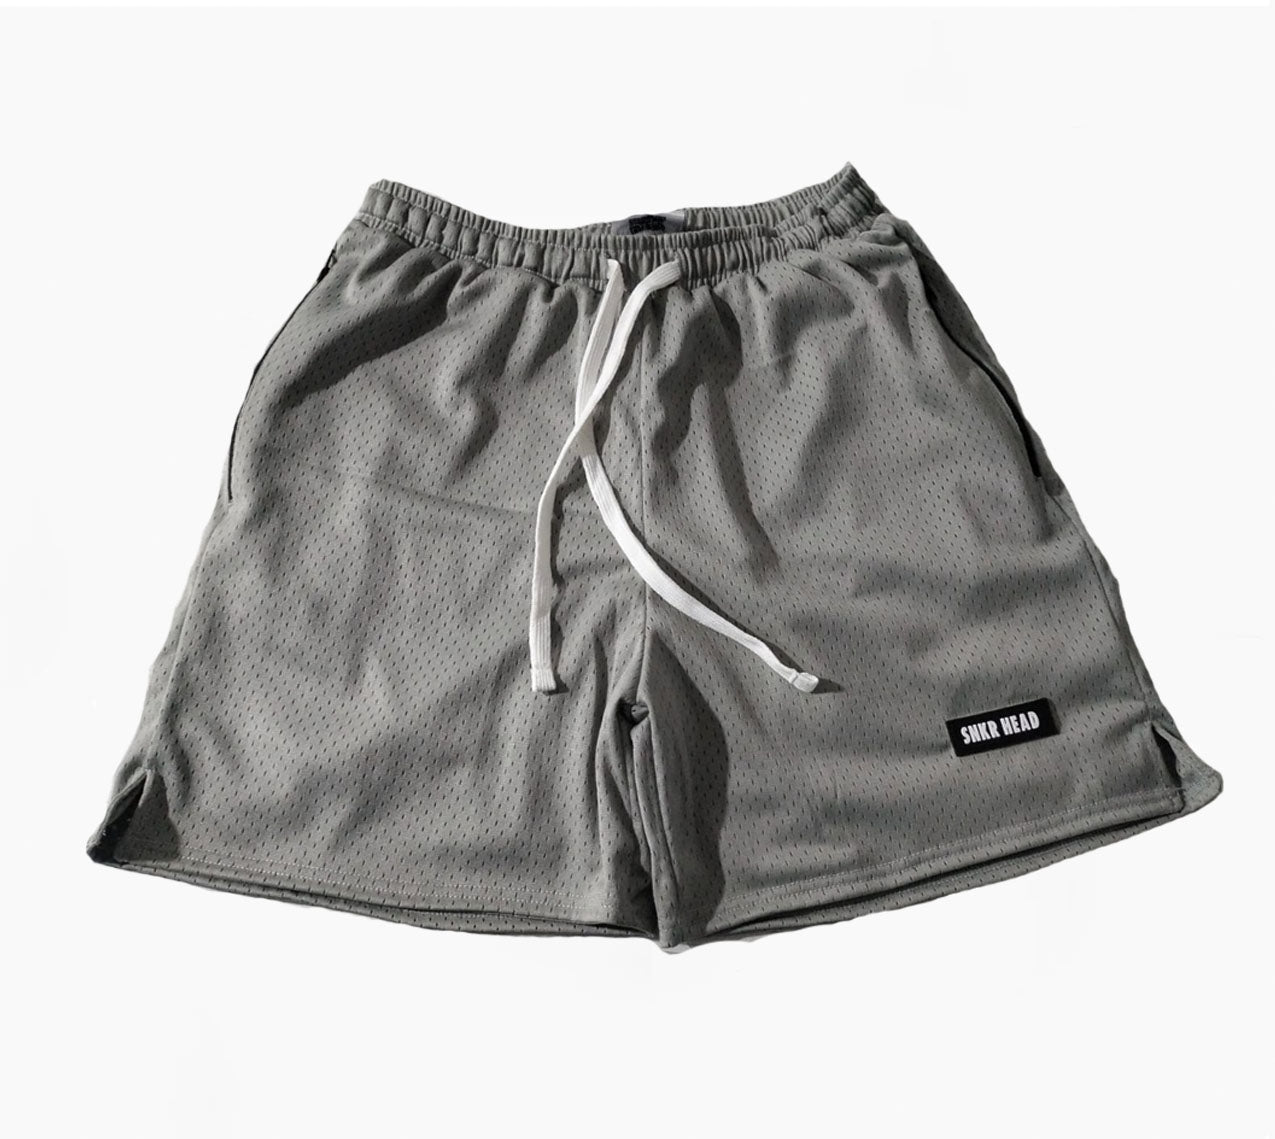 Cut & Sew Everyday SNKR HEAD Grey Rubber Patch Shorts